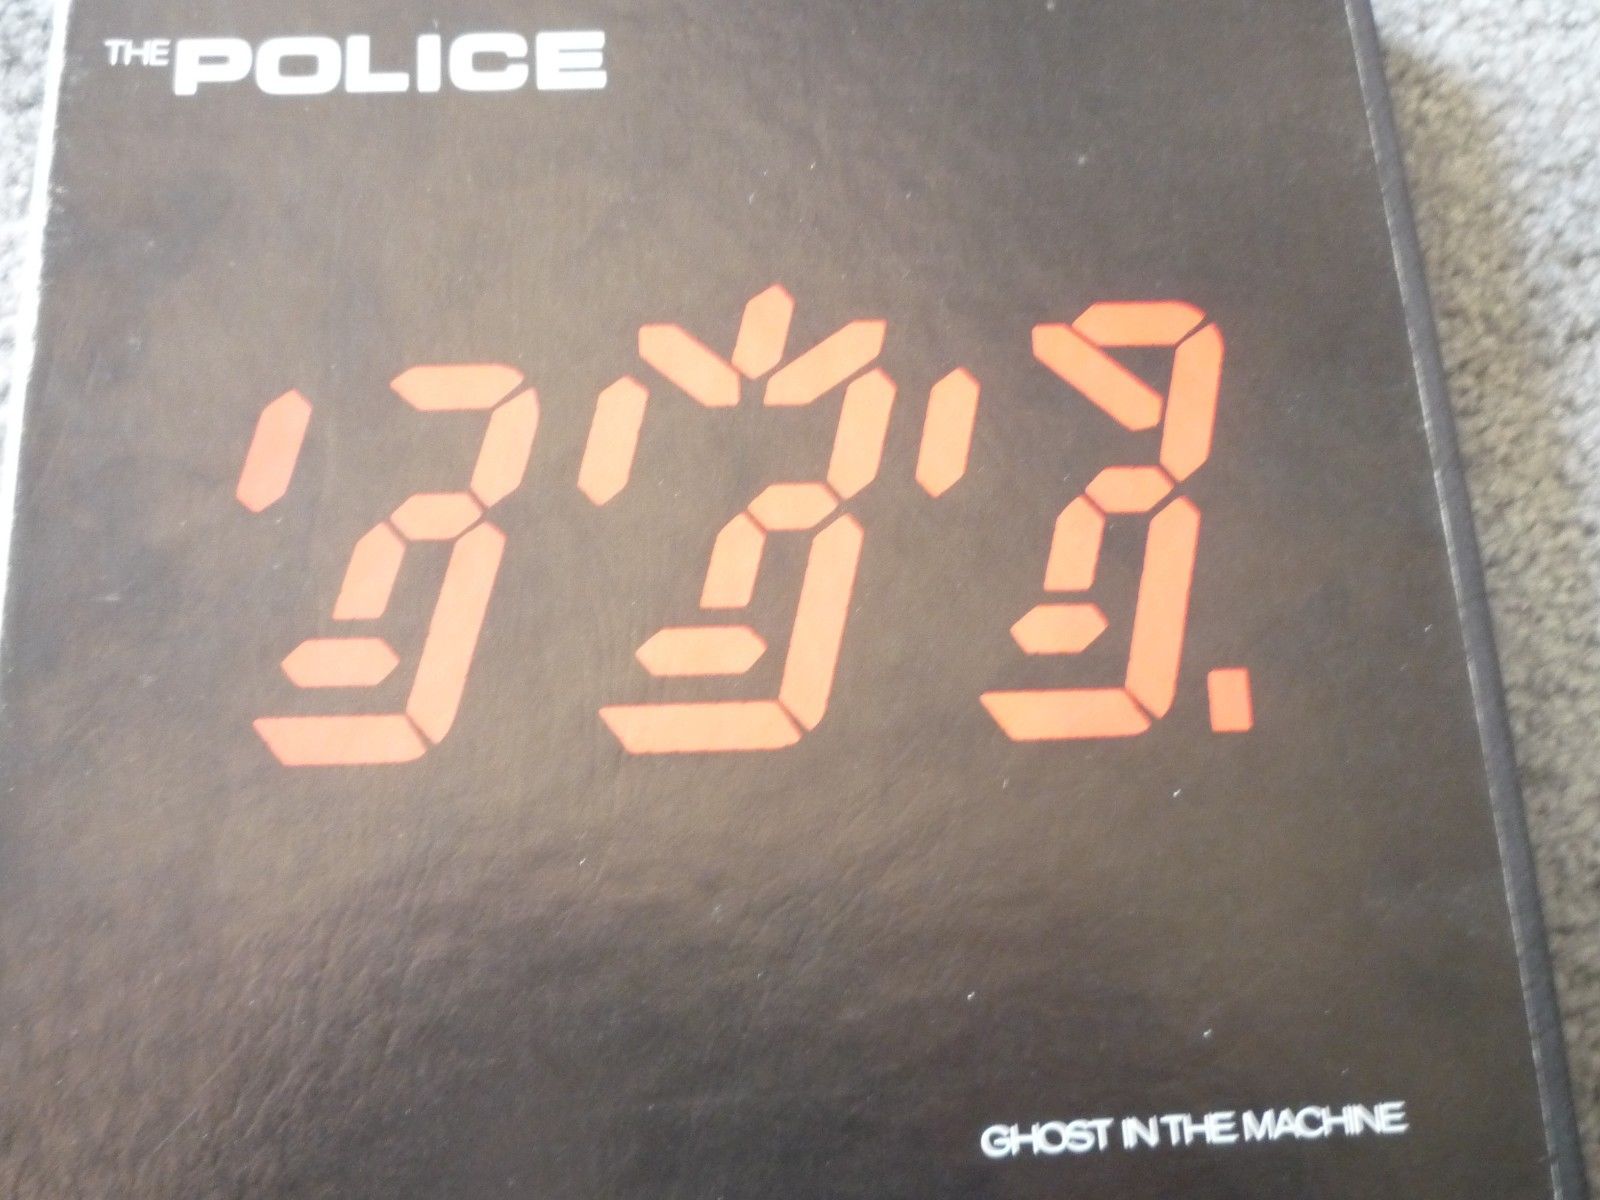  The Police -Ghost in the Machine Reel to reel tape 3